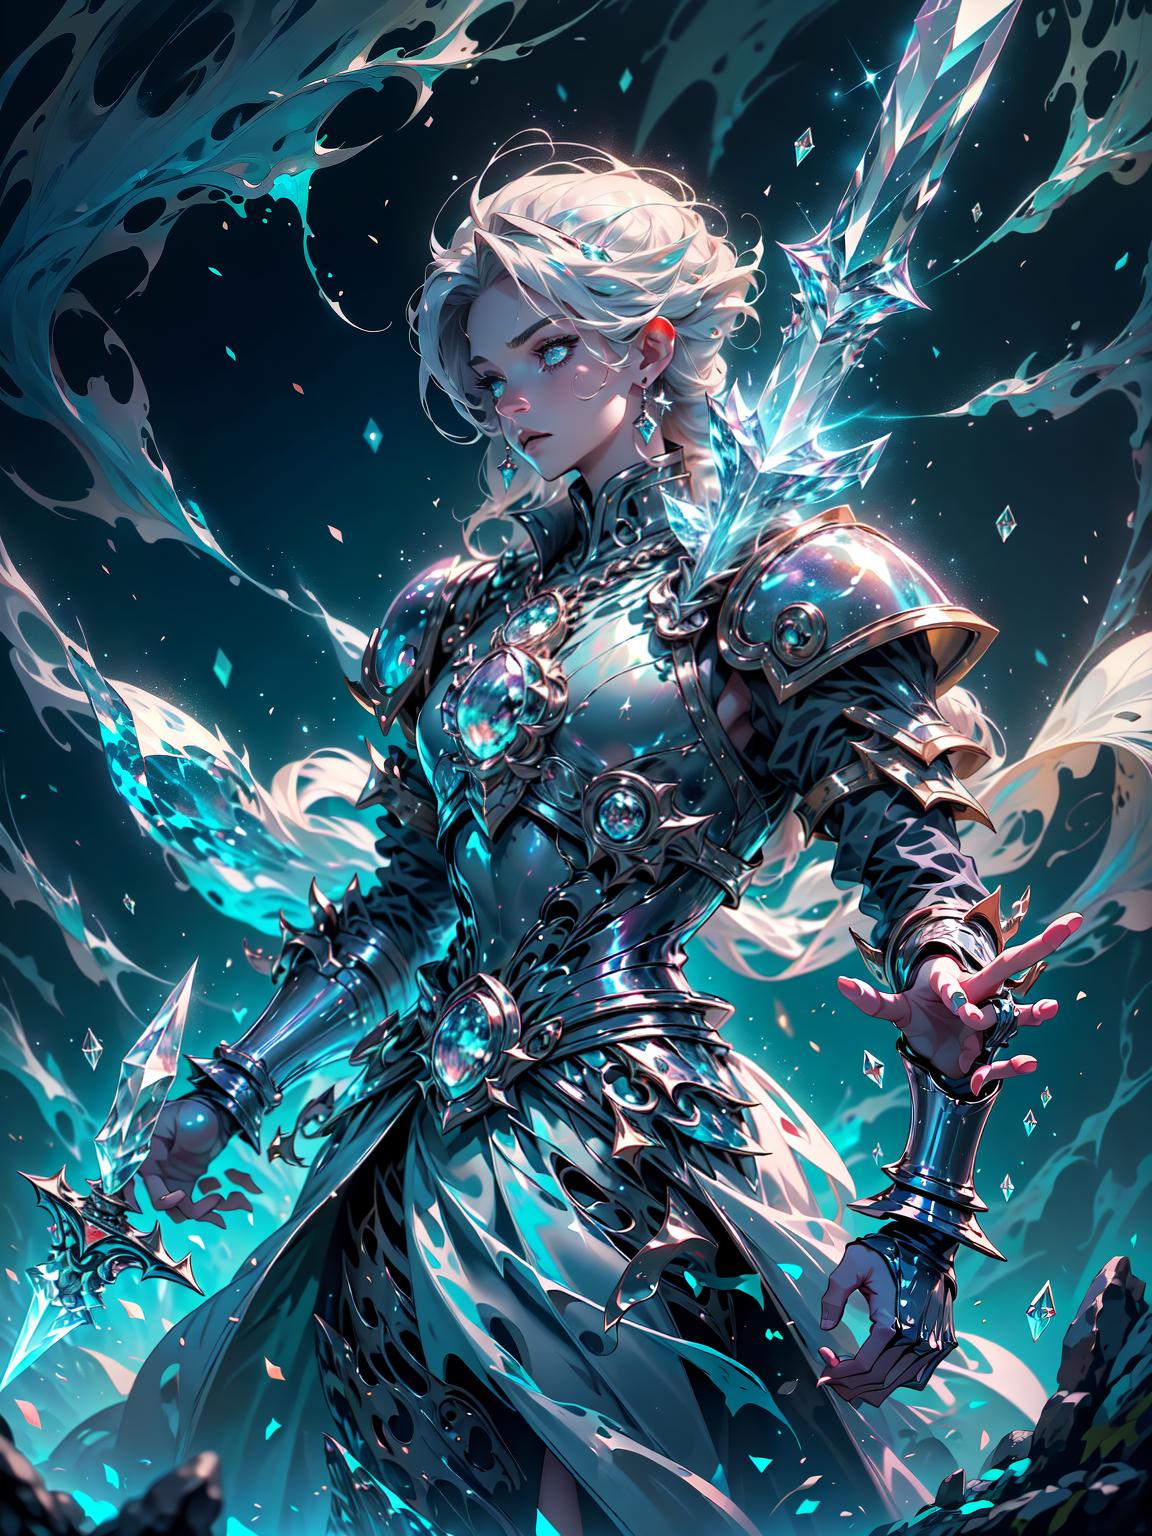  master piece, best quality, ultra detailed, highres, 4k.8k, Mysterious knight, Using illusion magic to create illusions, Focused and determined, BREAK A knight who uses illusion magic, Enchanted forest, Enchanted sword, glowing crystals, mysterious mist, BREAK Mystical and captivating, Shimmering aura, magical sparks, ethereal illusions, crystallineAI,fantasy00d